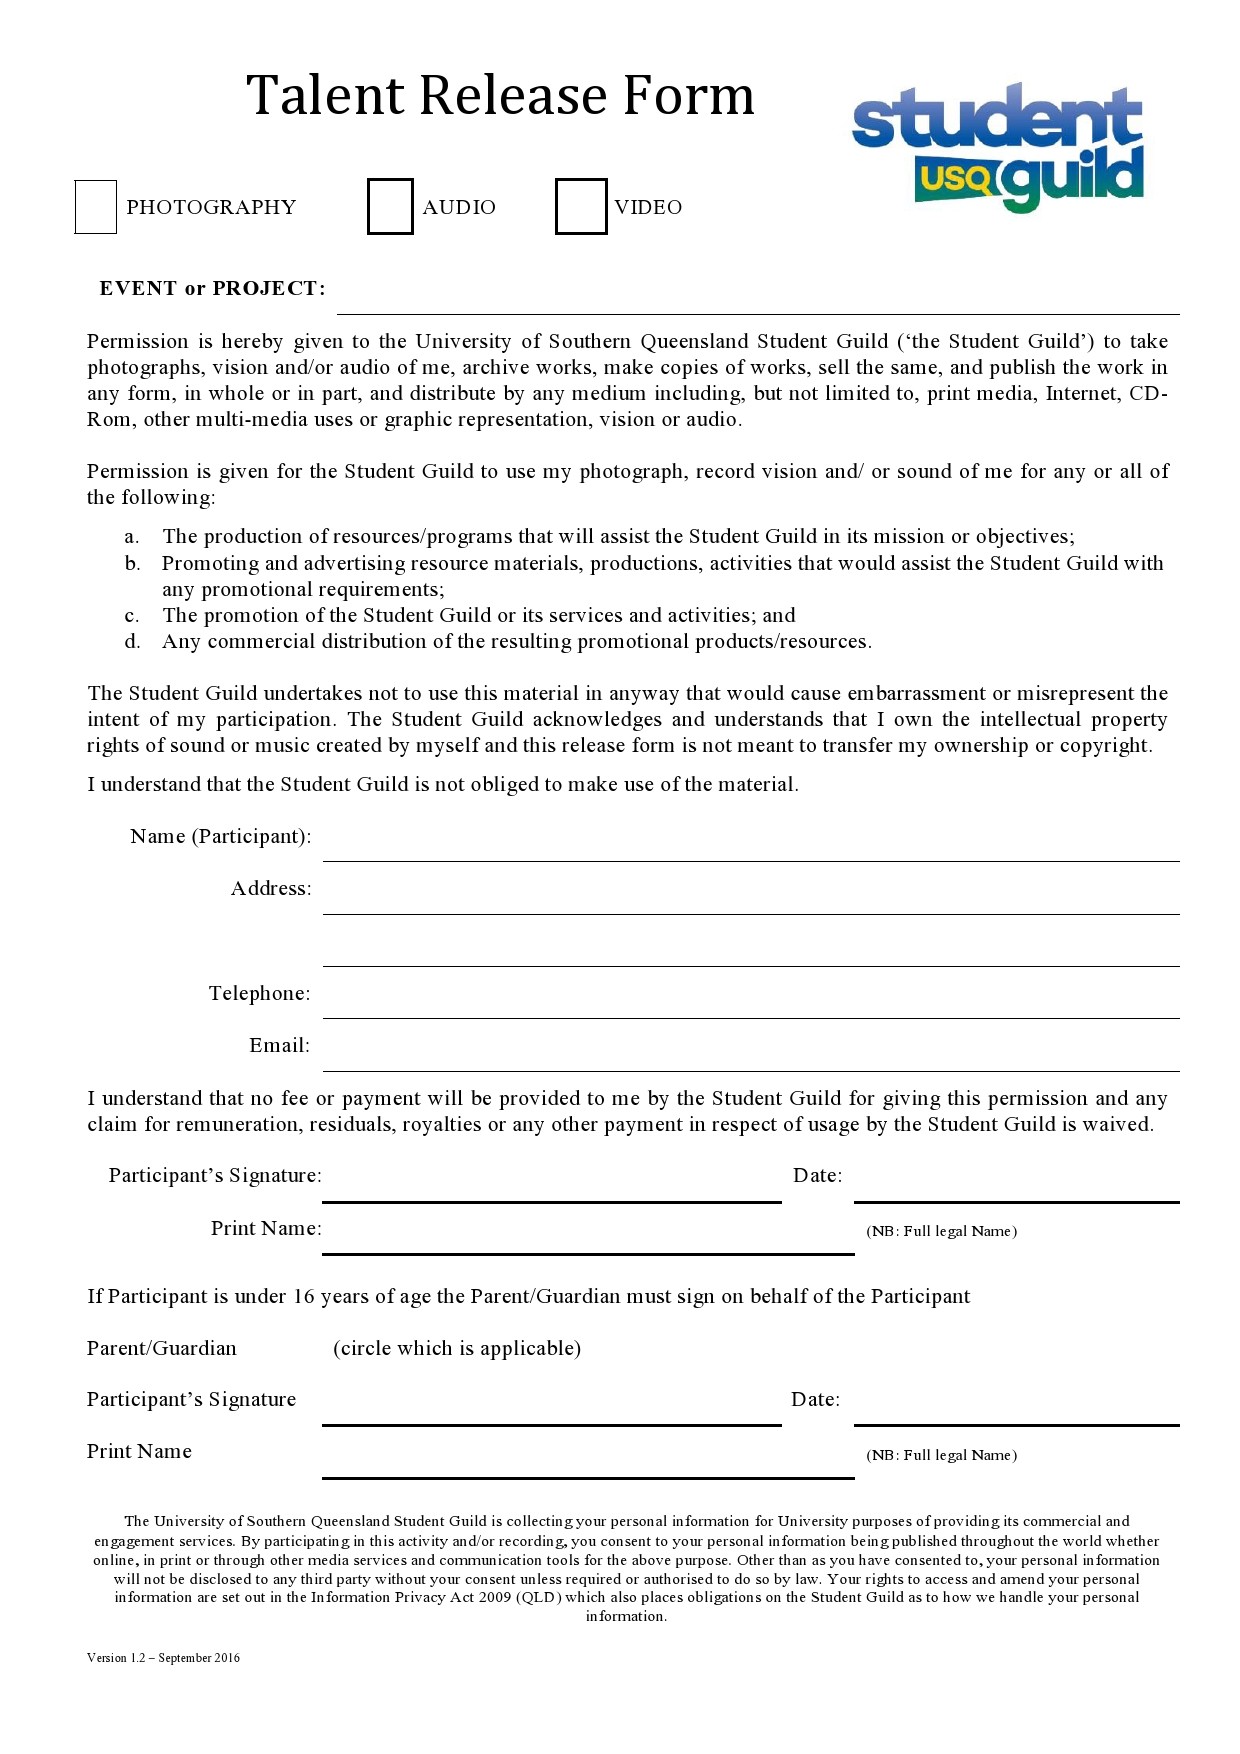 Free talent release form 43